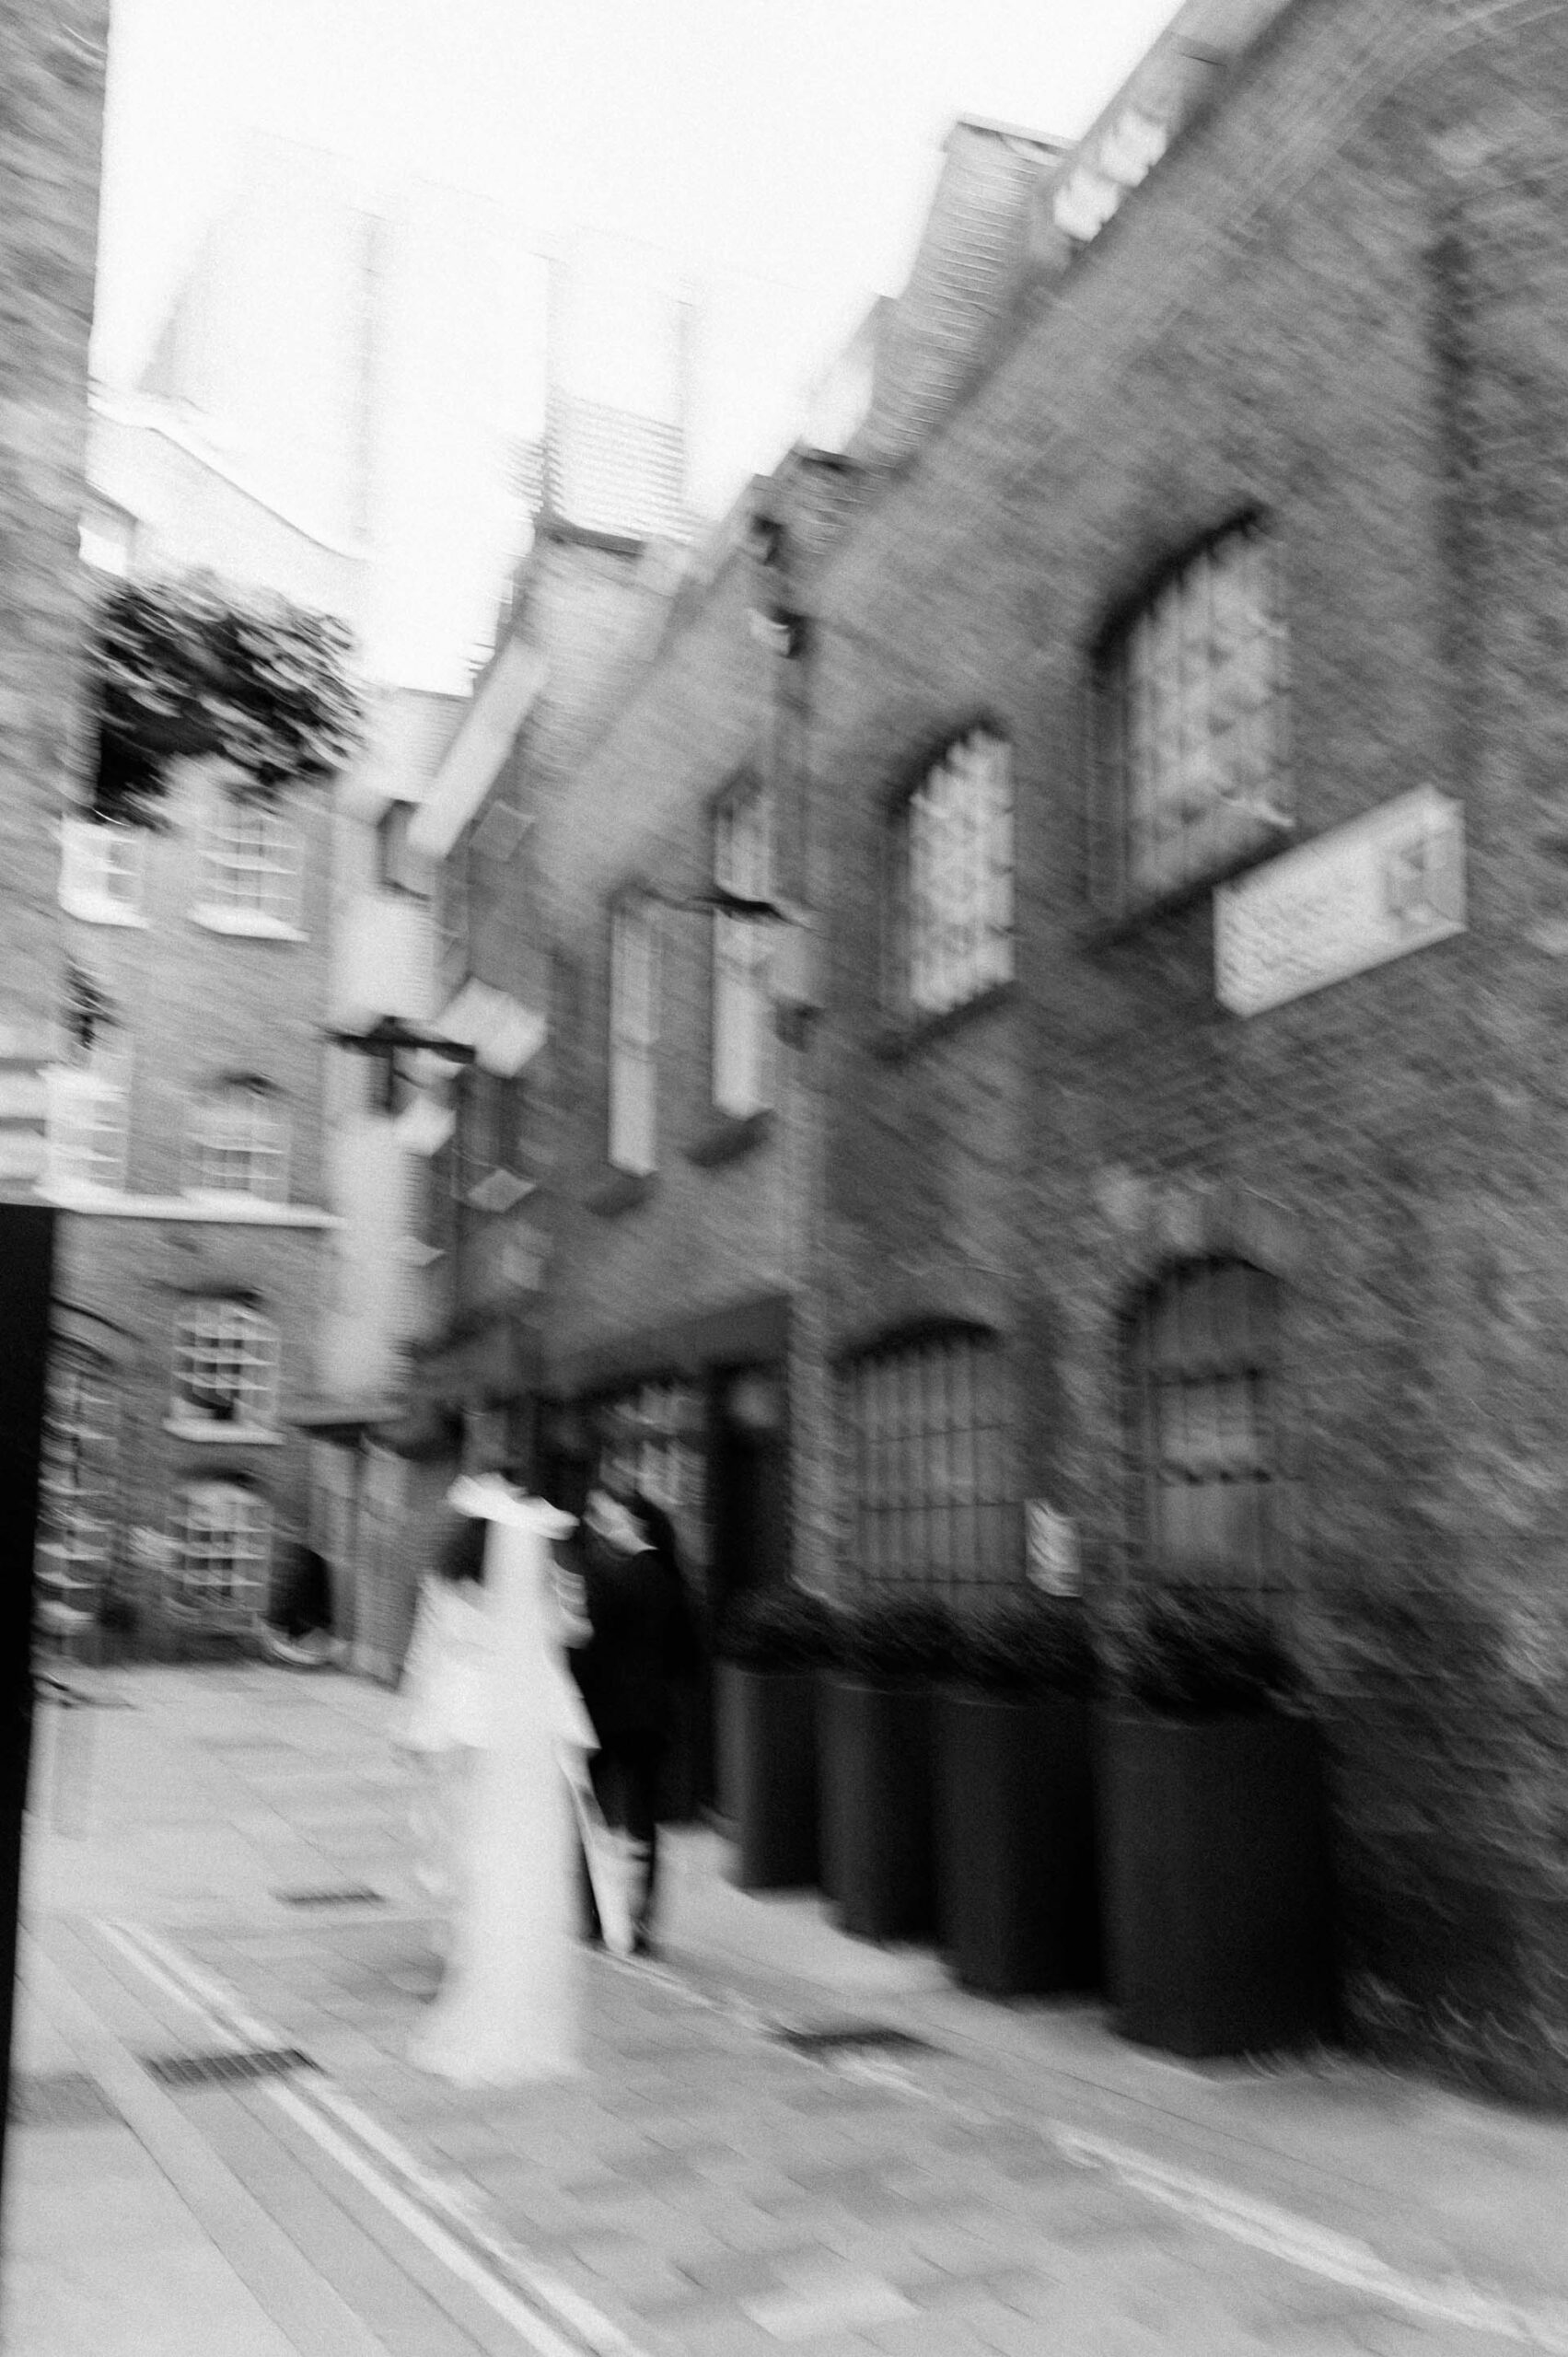 bride and groom walking down street in London with motion blur